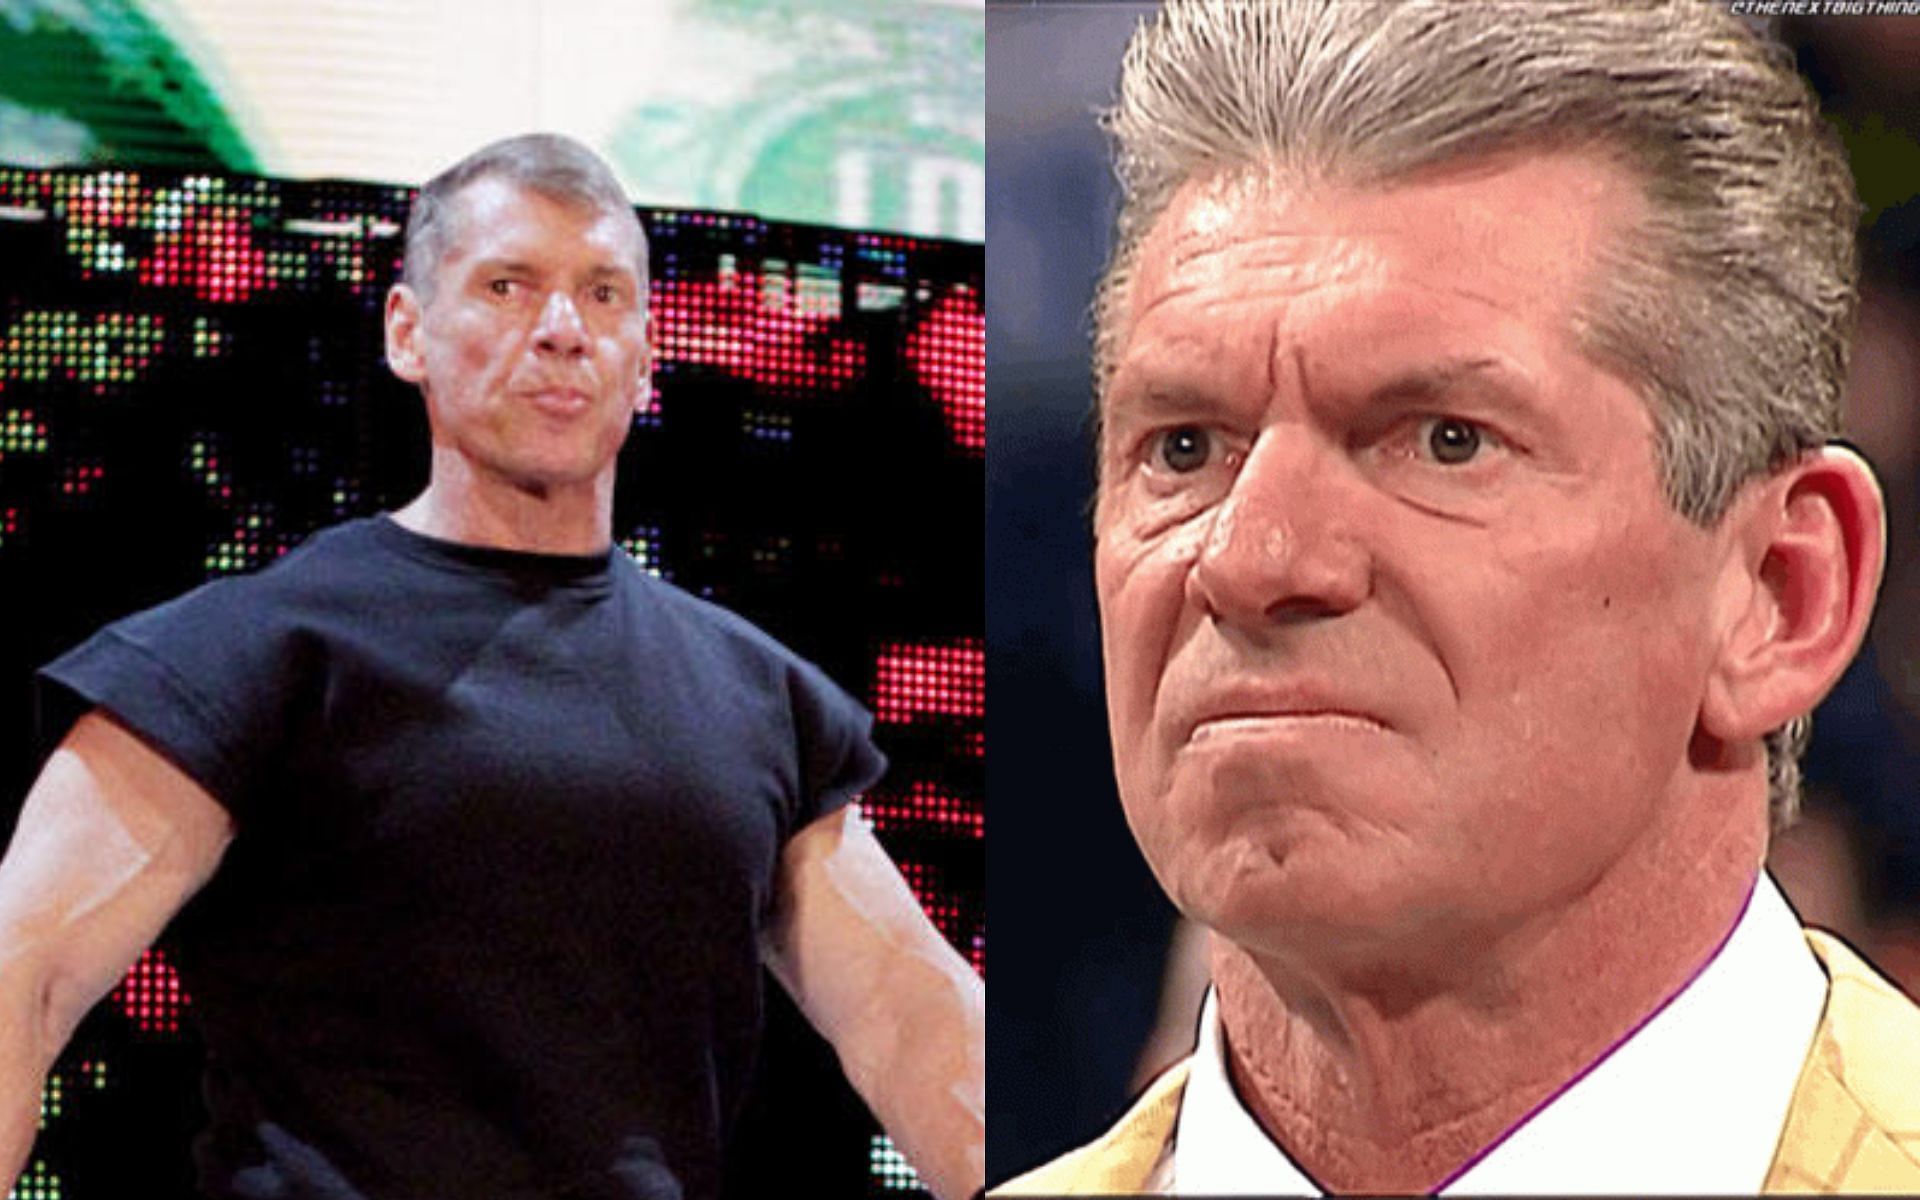 Vince McMahon is known for his eccentric nature